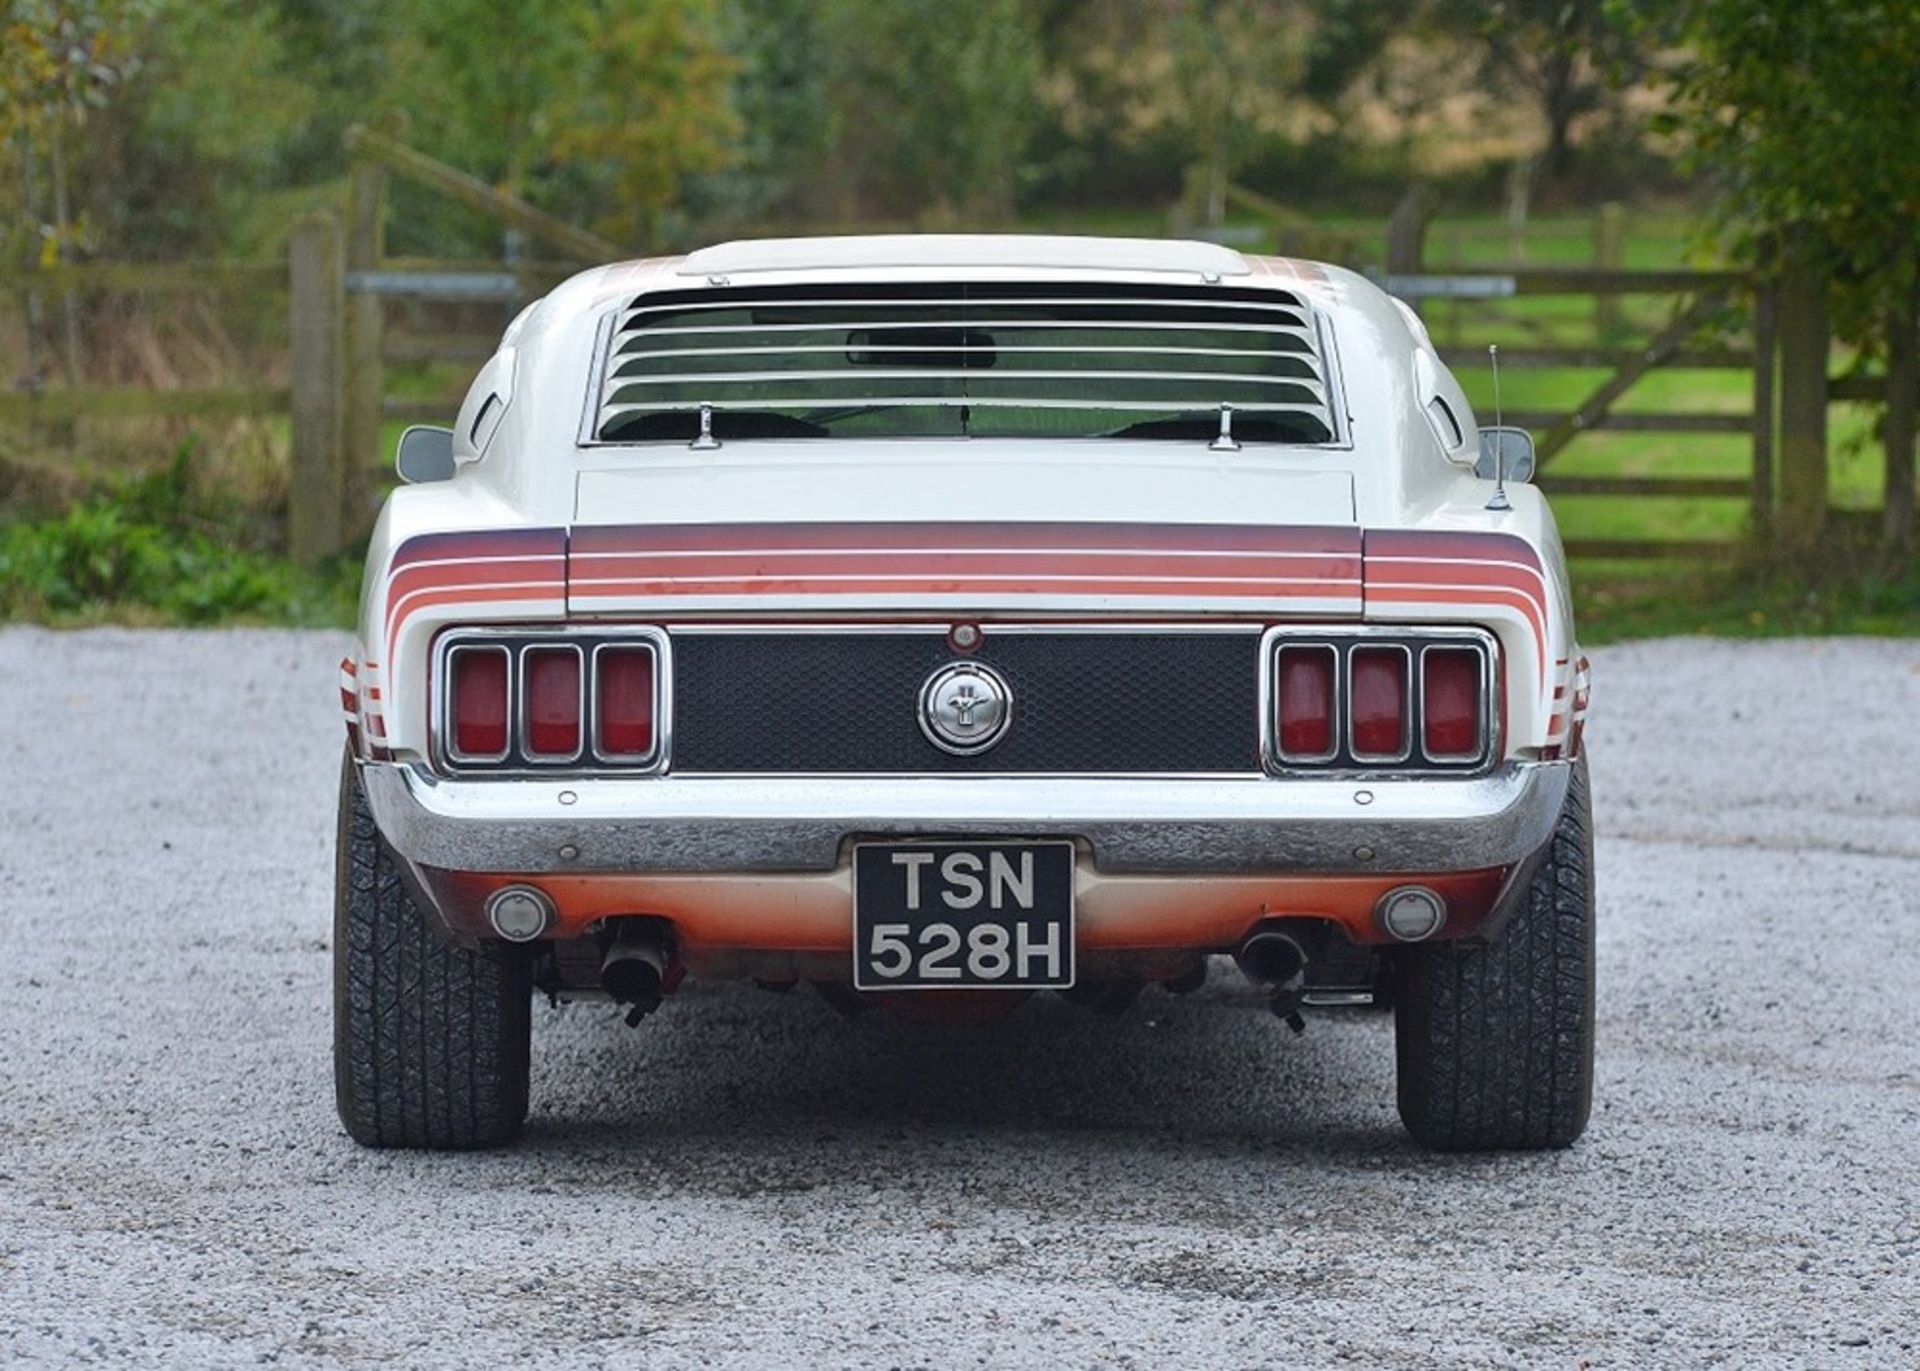 1970 Ford Mustang Mach 1 428 Cobra Jet ‘G Force’ - Image 3 of 9